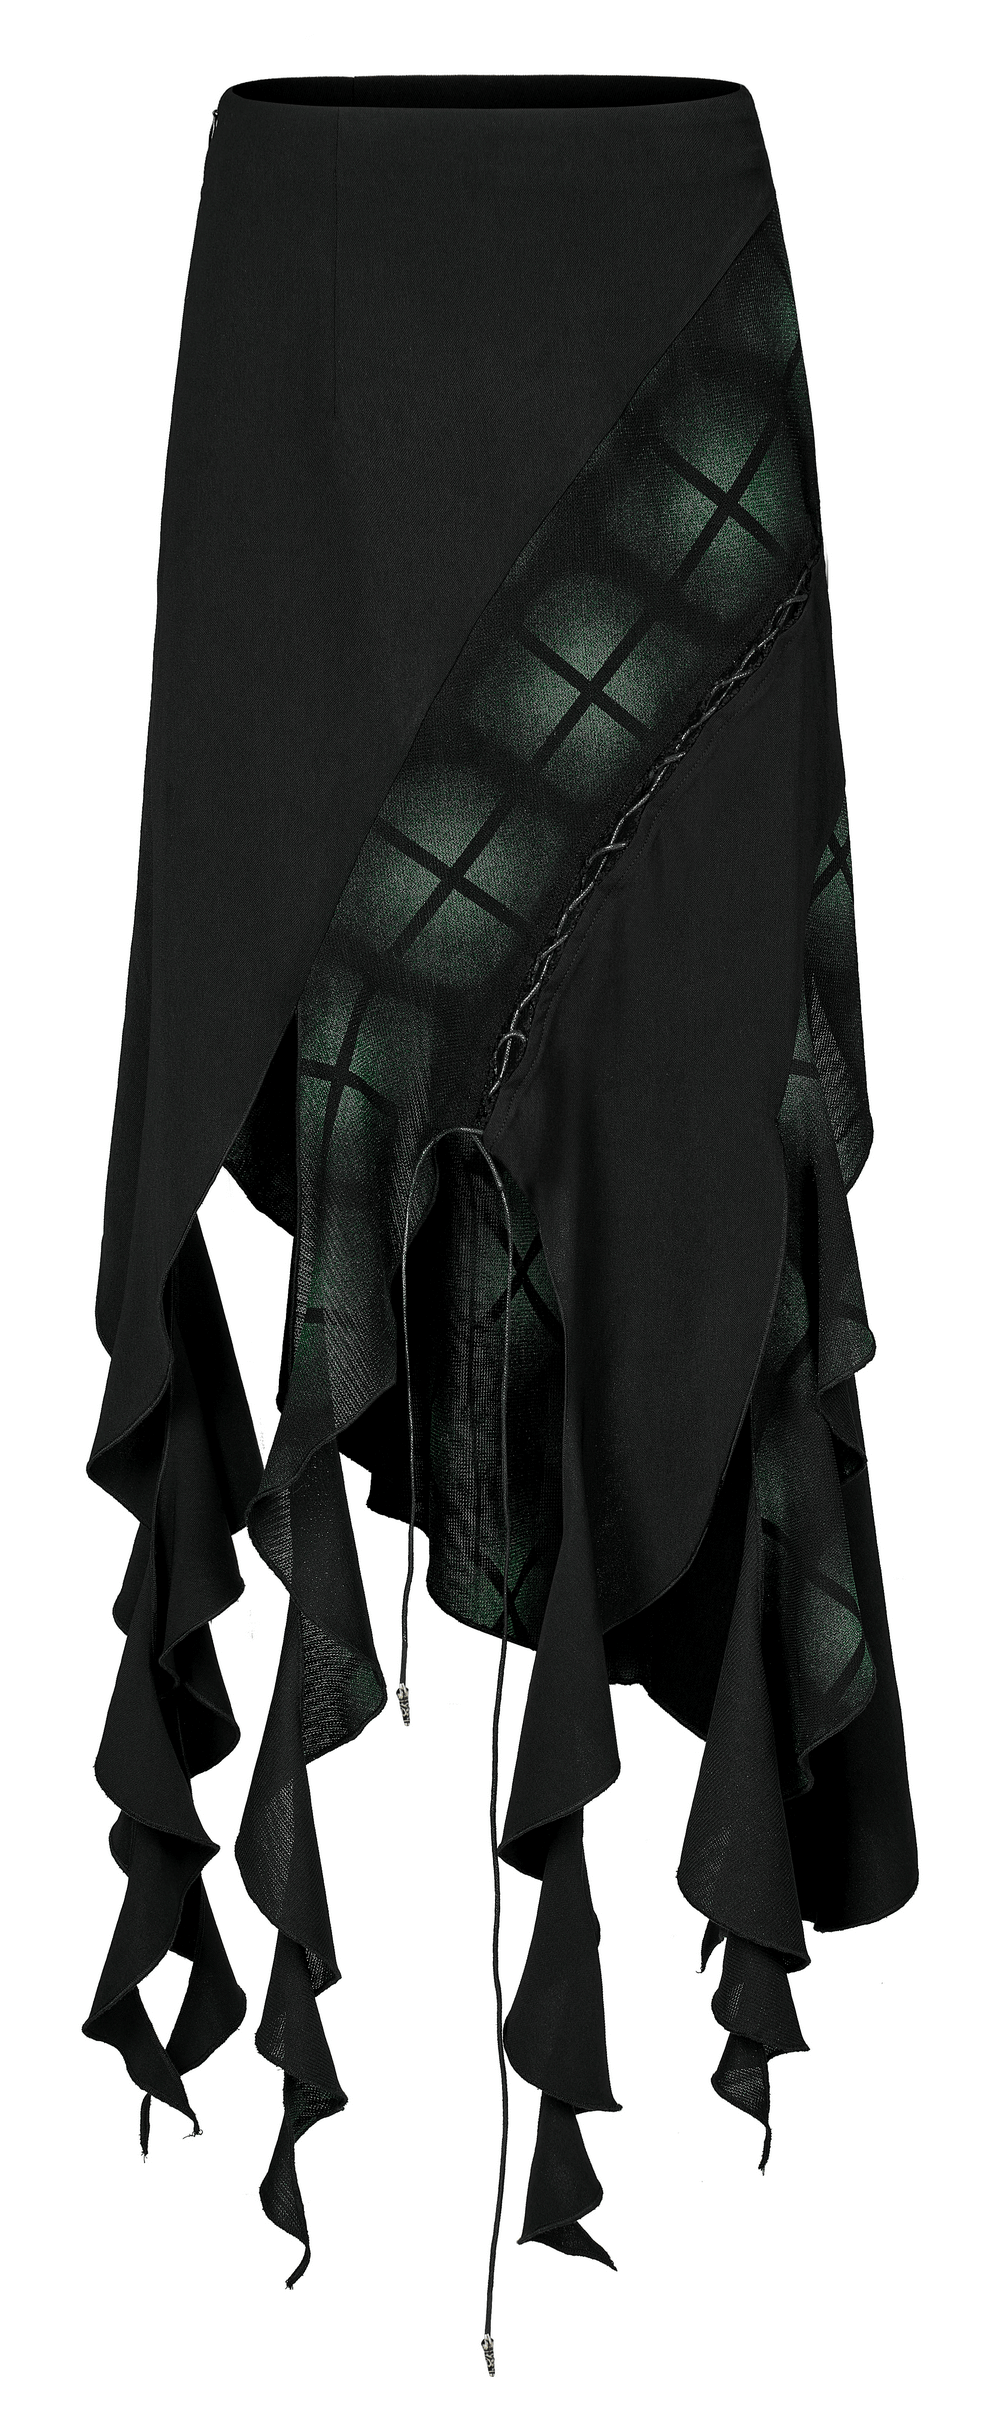 Gothic Asymmetrical Skirt with Ruffle Detailing